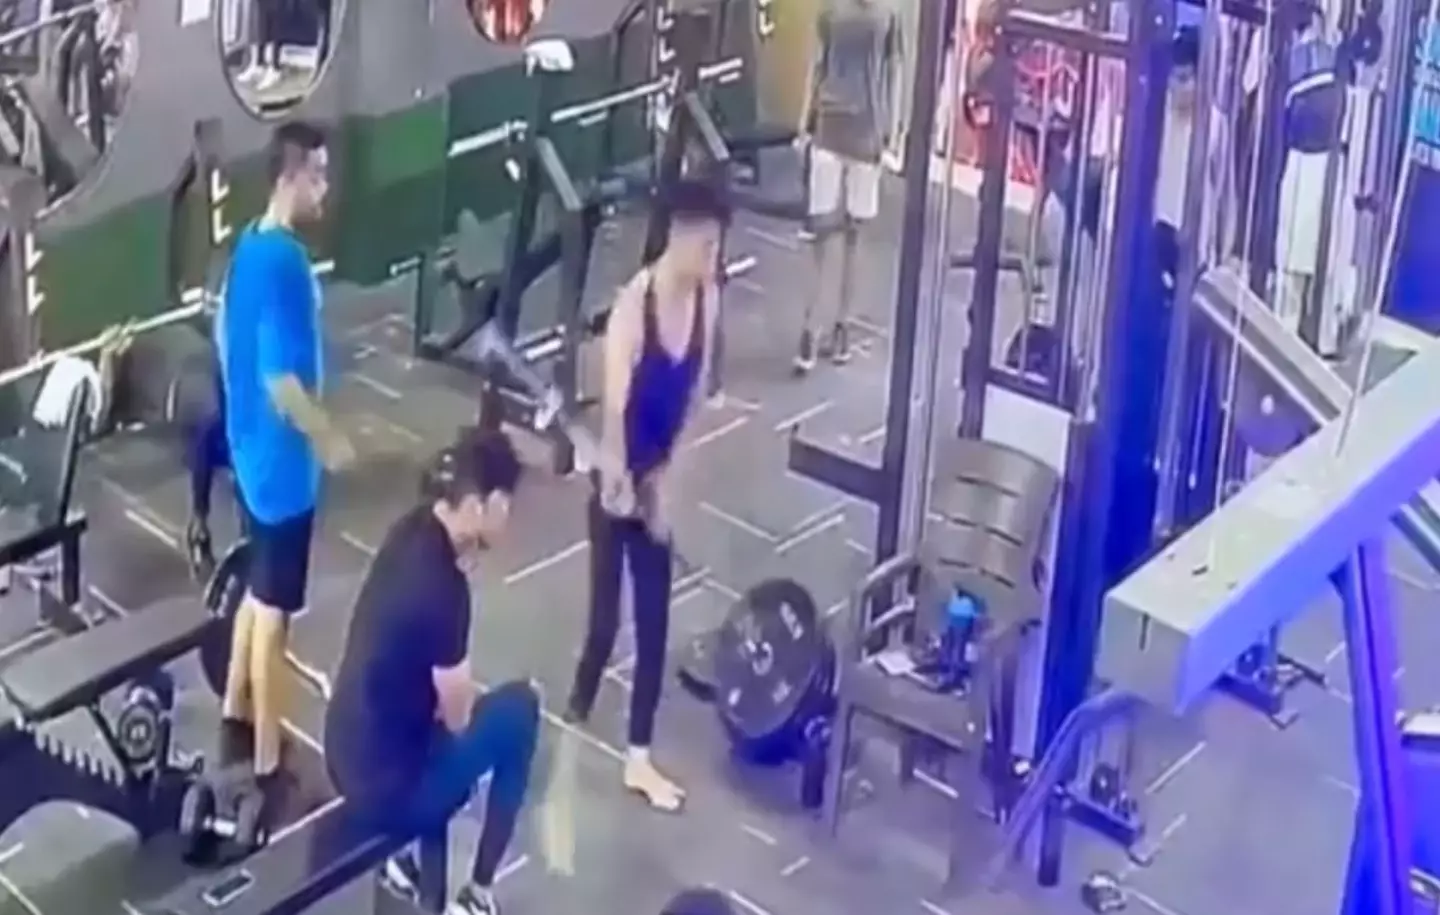 The barbell nearly hit him.